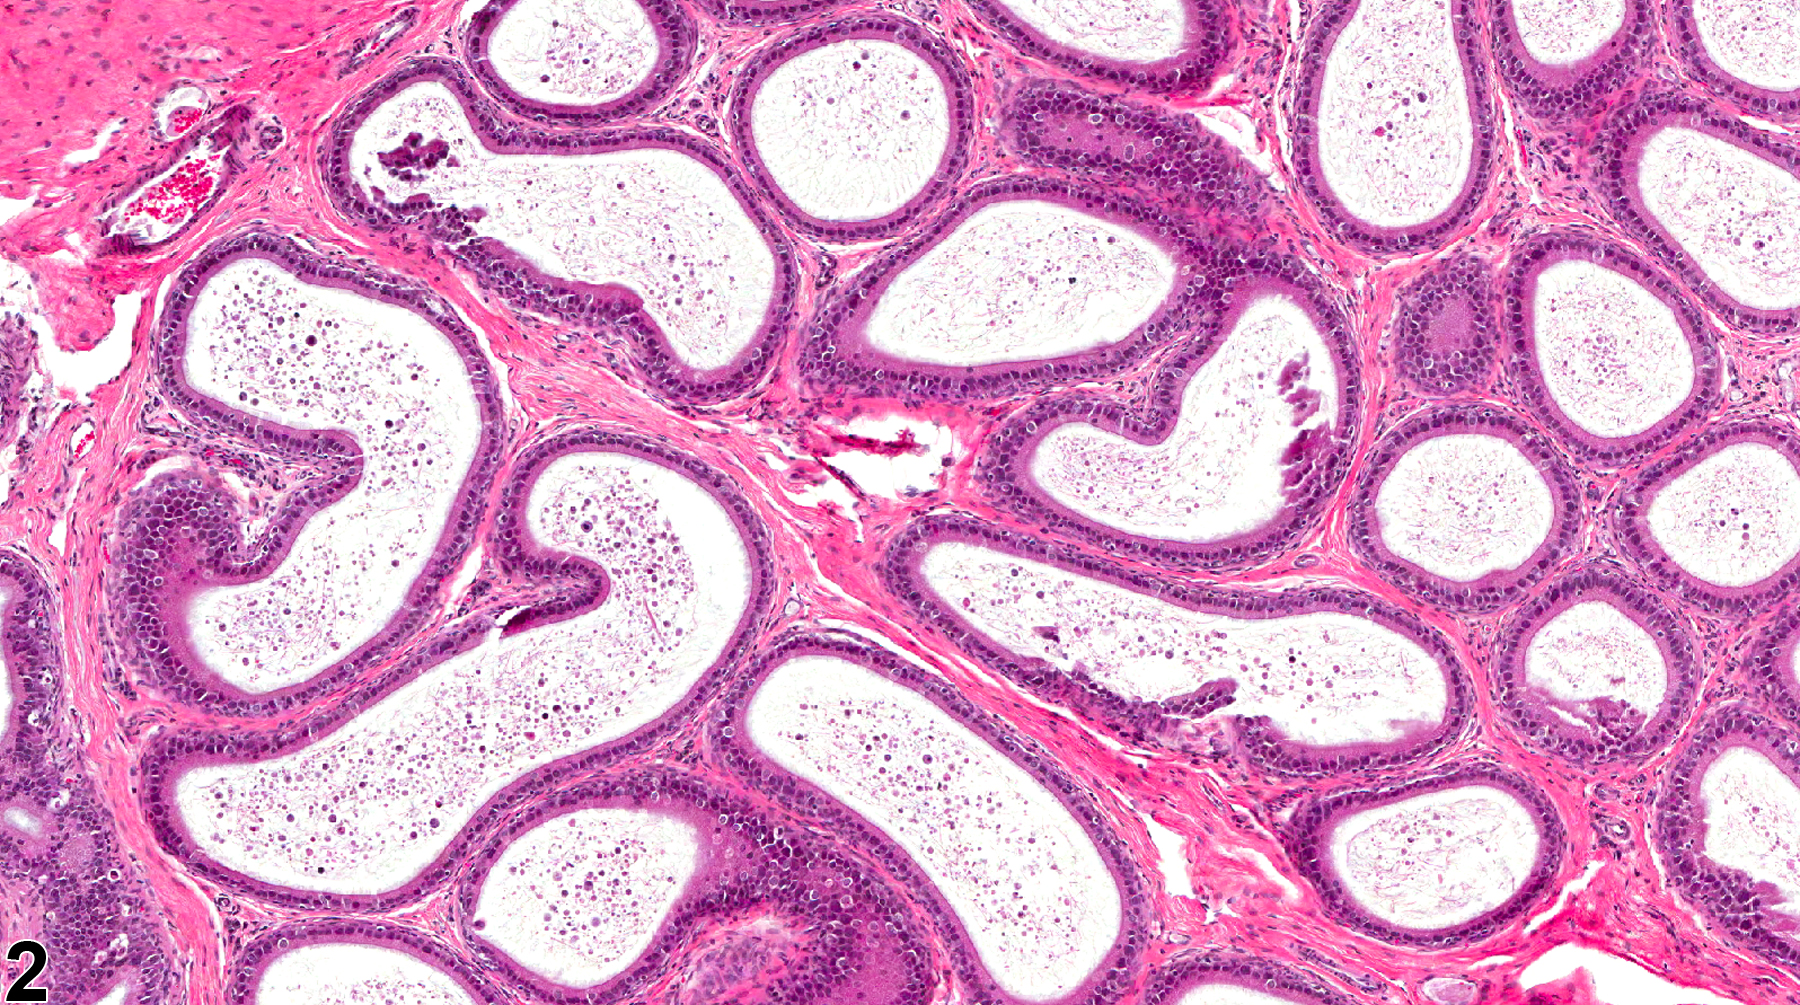 Image of duct exfoliated germ cell in the epididymis from a male F344/N rat in a subchronic study